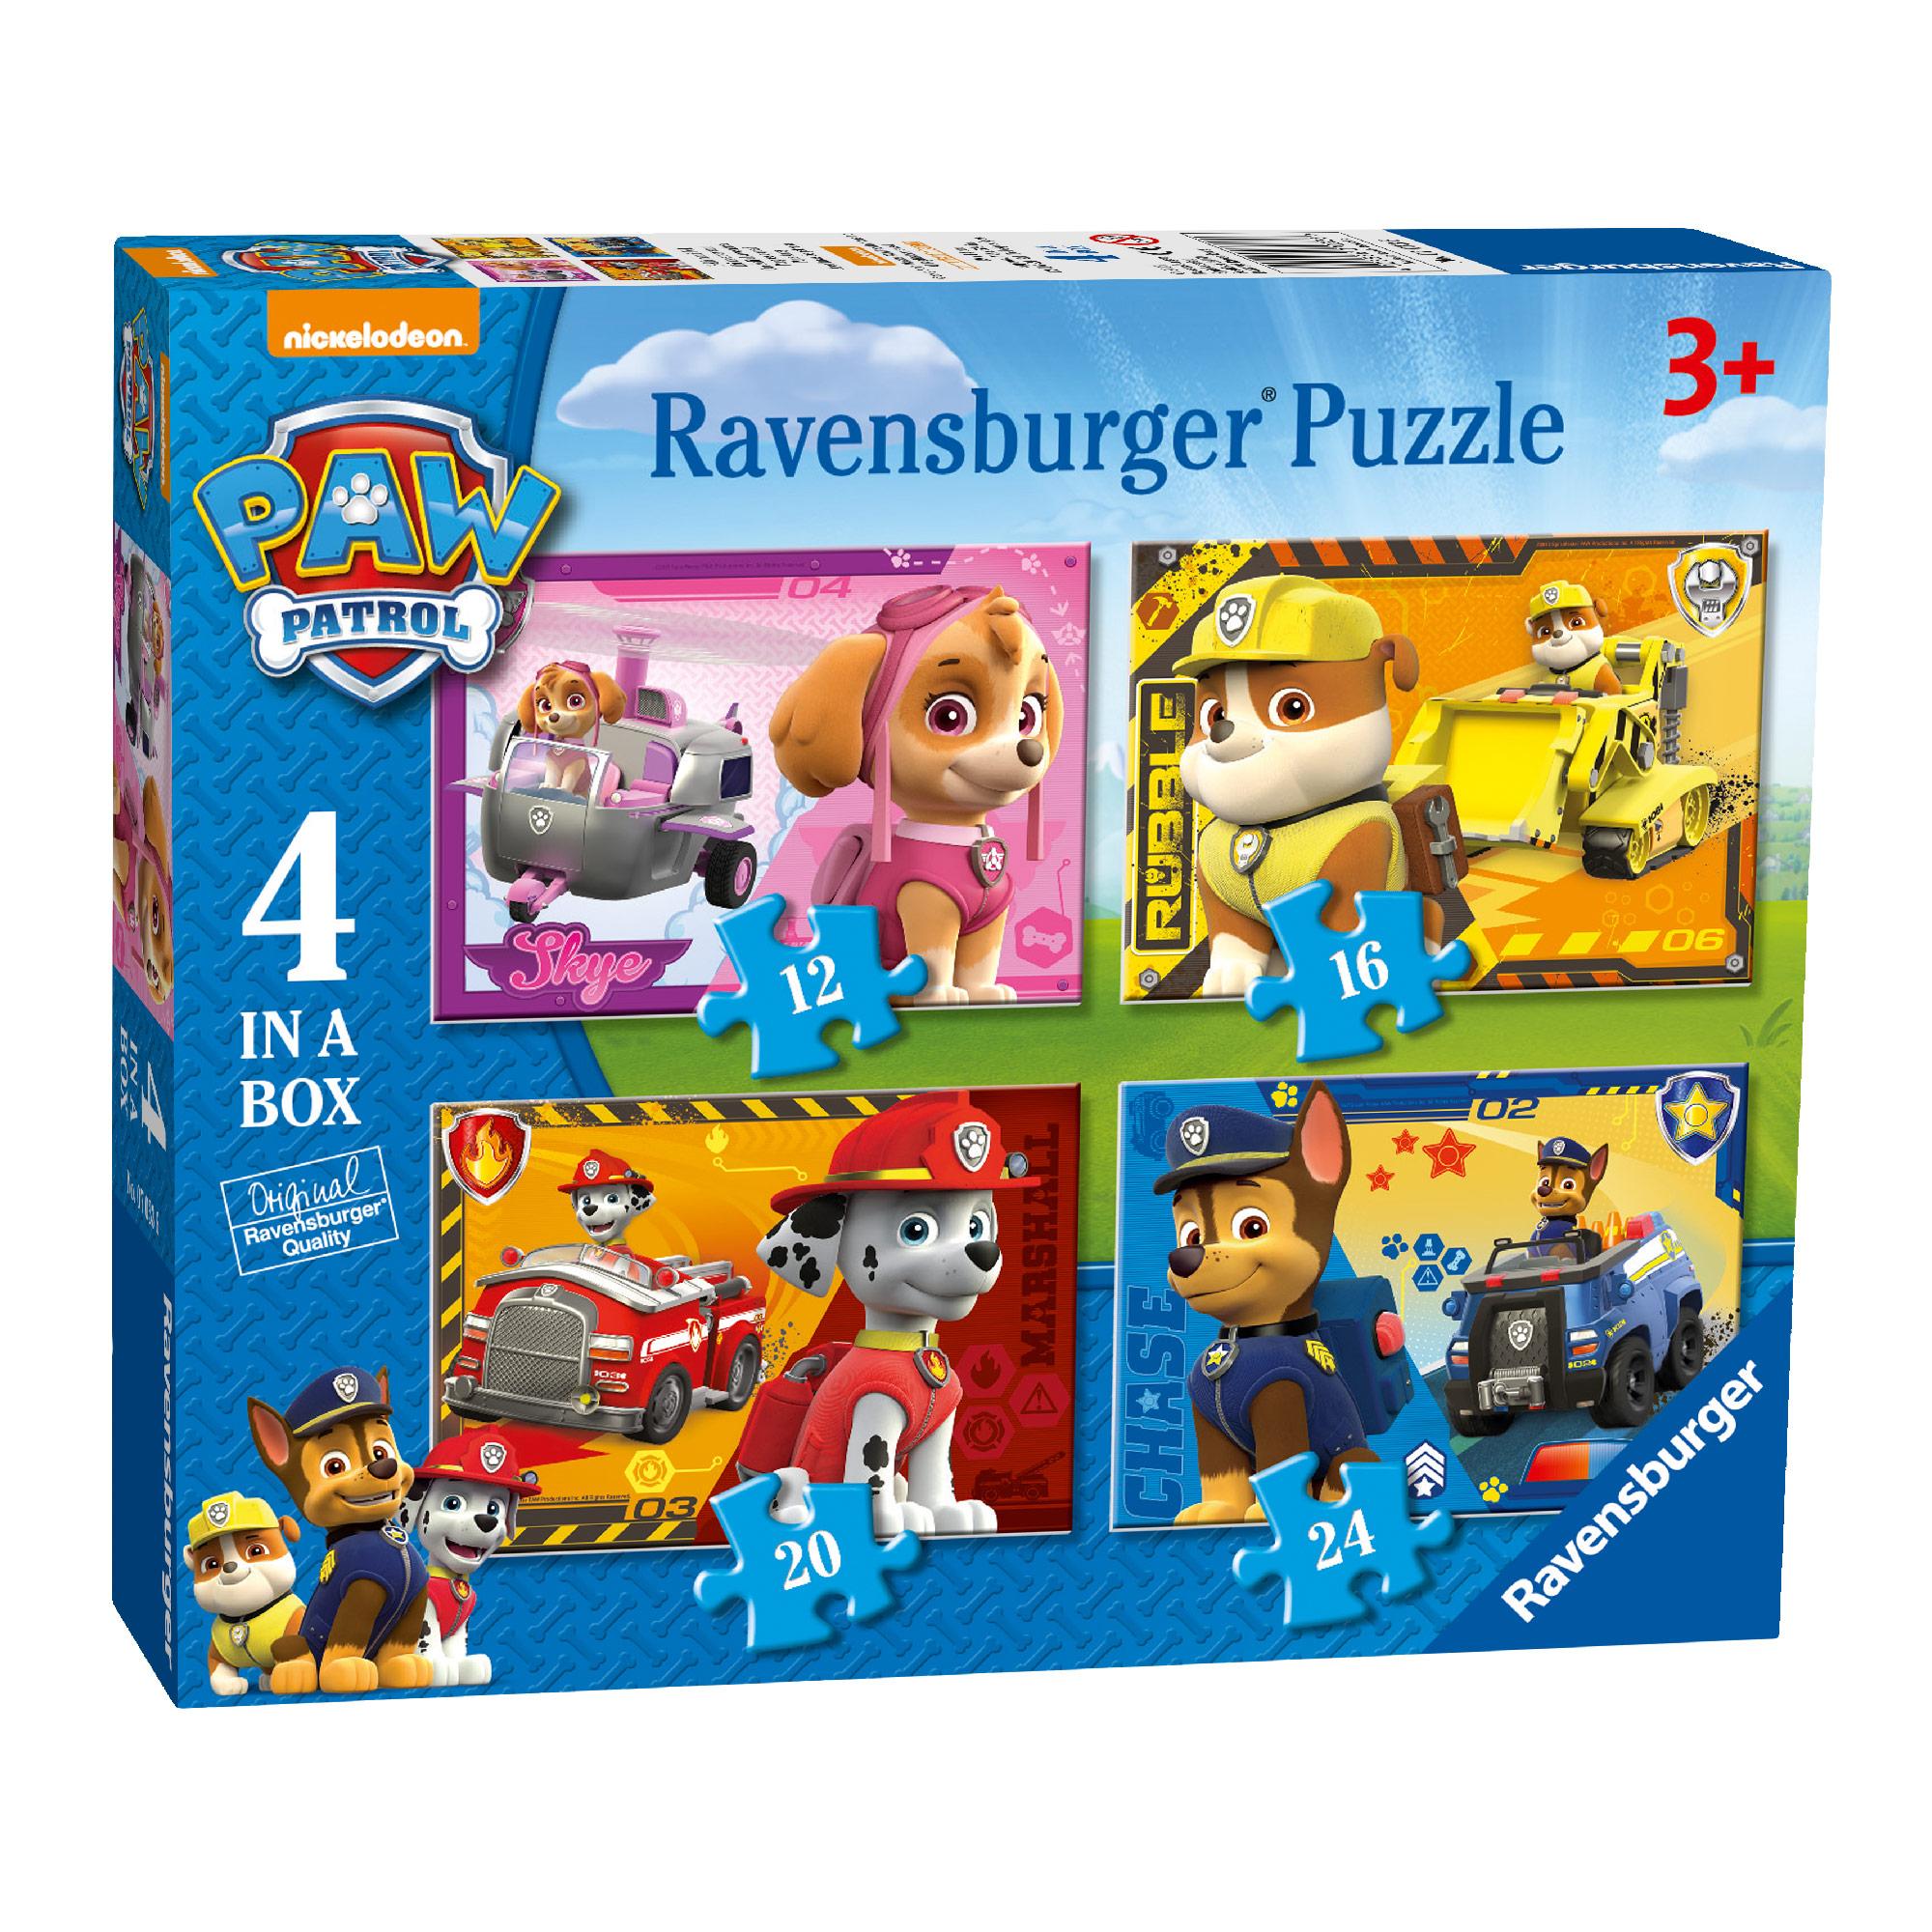 Ravensburger 4 In A Box Puzzles - Paw Patrol - Wrap Your Love